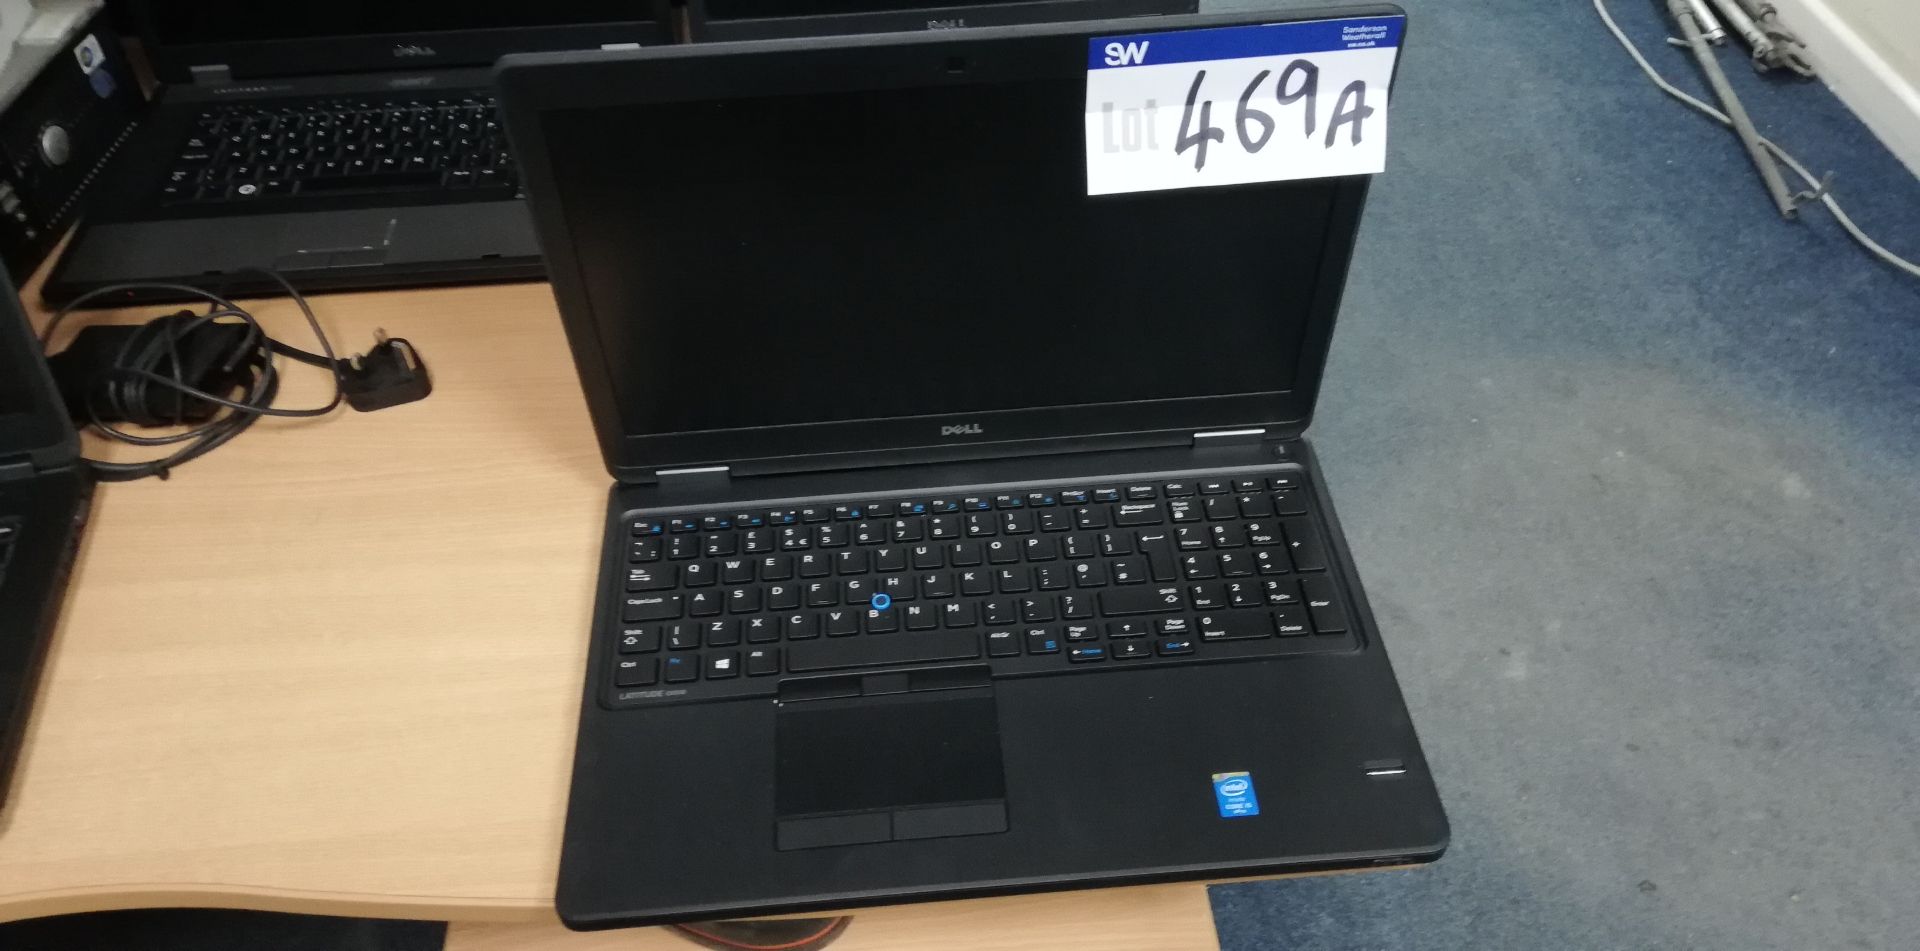 Dell Latitude E5550 Intel Core i5 Laptop (hard disk removed), serial no. G8W6Q32, with power